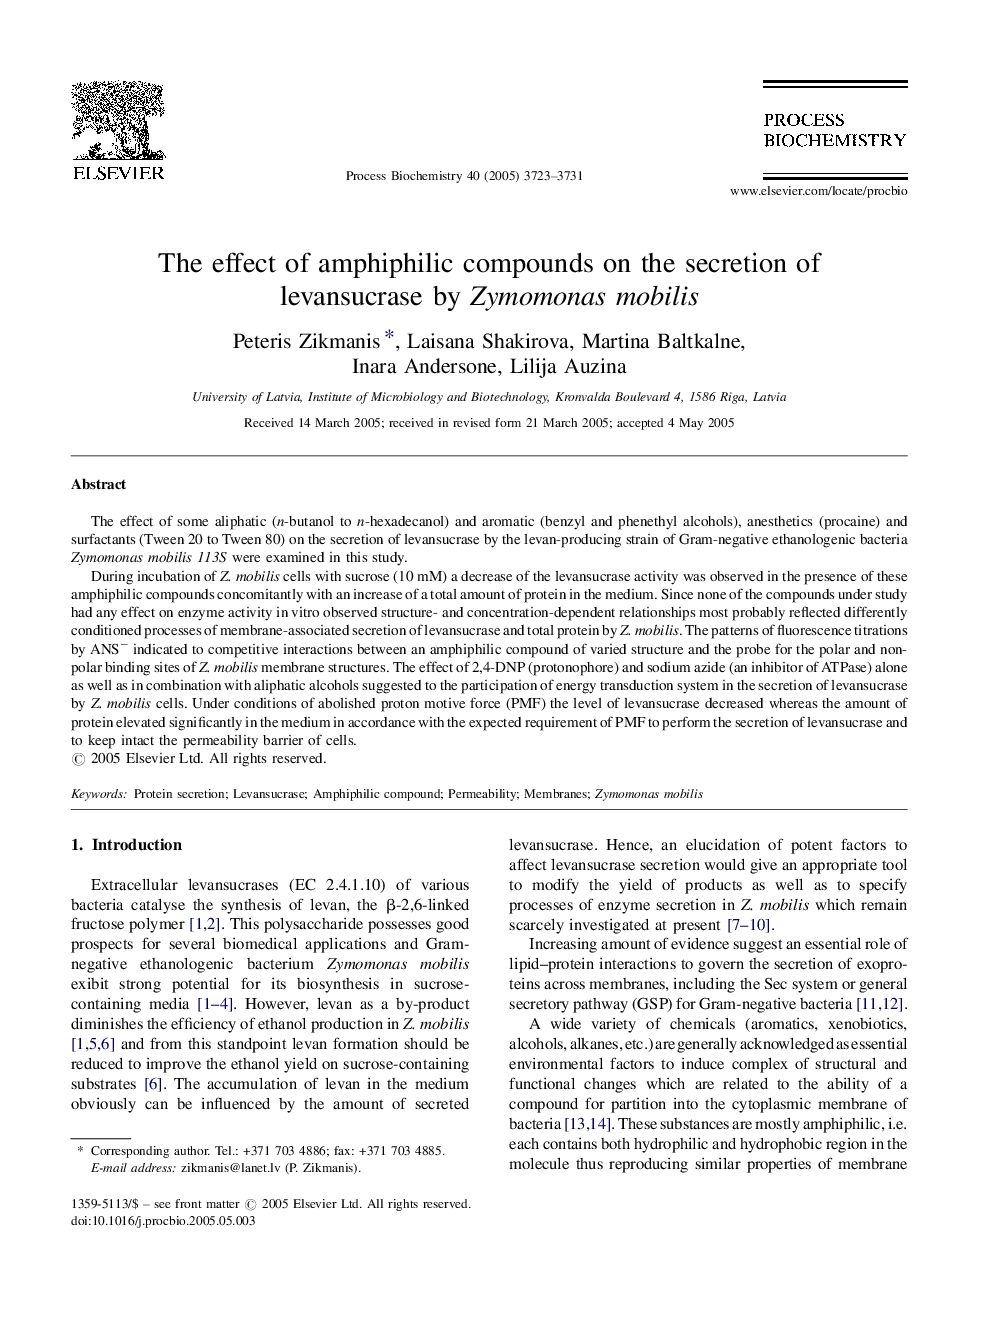 The effect of amphiphilic compounds on the secretion of levansucrase by Zymomonas mobilis